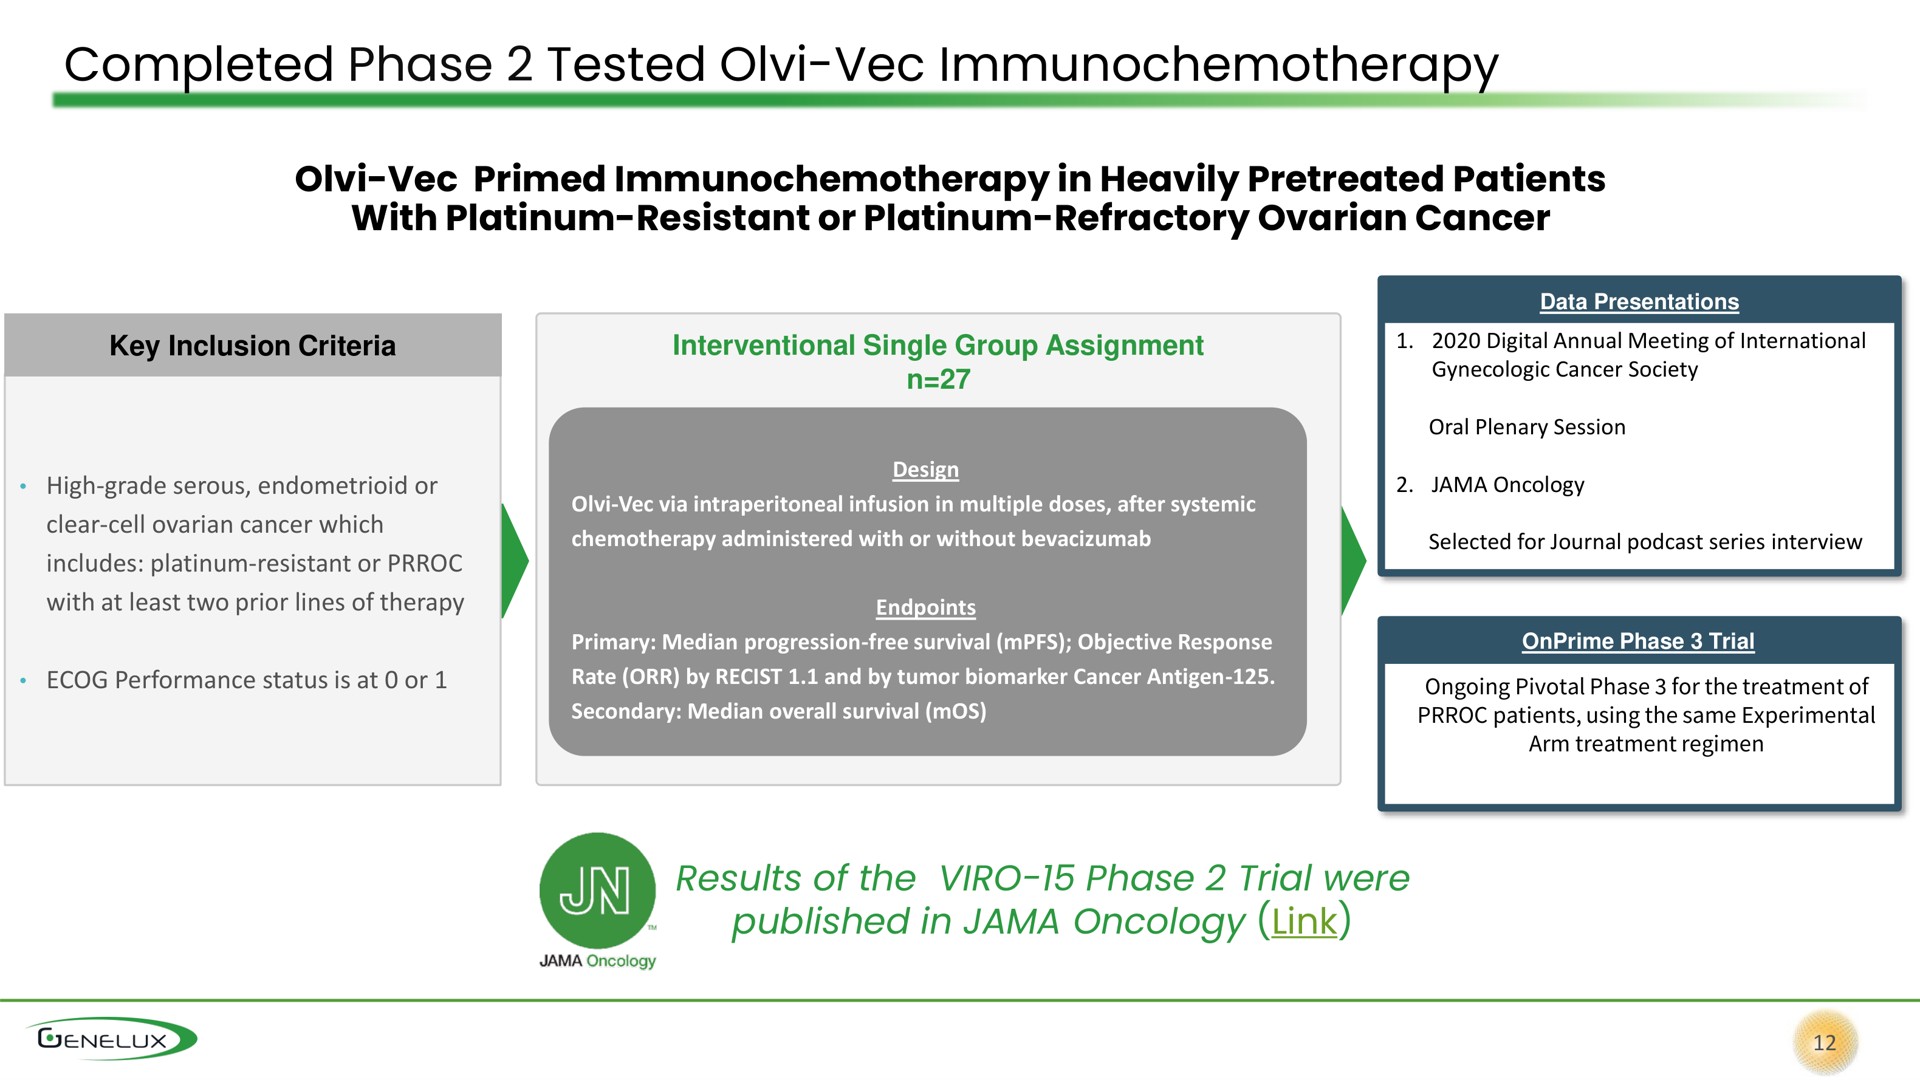 completed phase tested primed in heavily patients with platinum resistant or platinum refractory ovarian cancer published in jama oncology link | Genelux